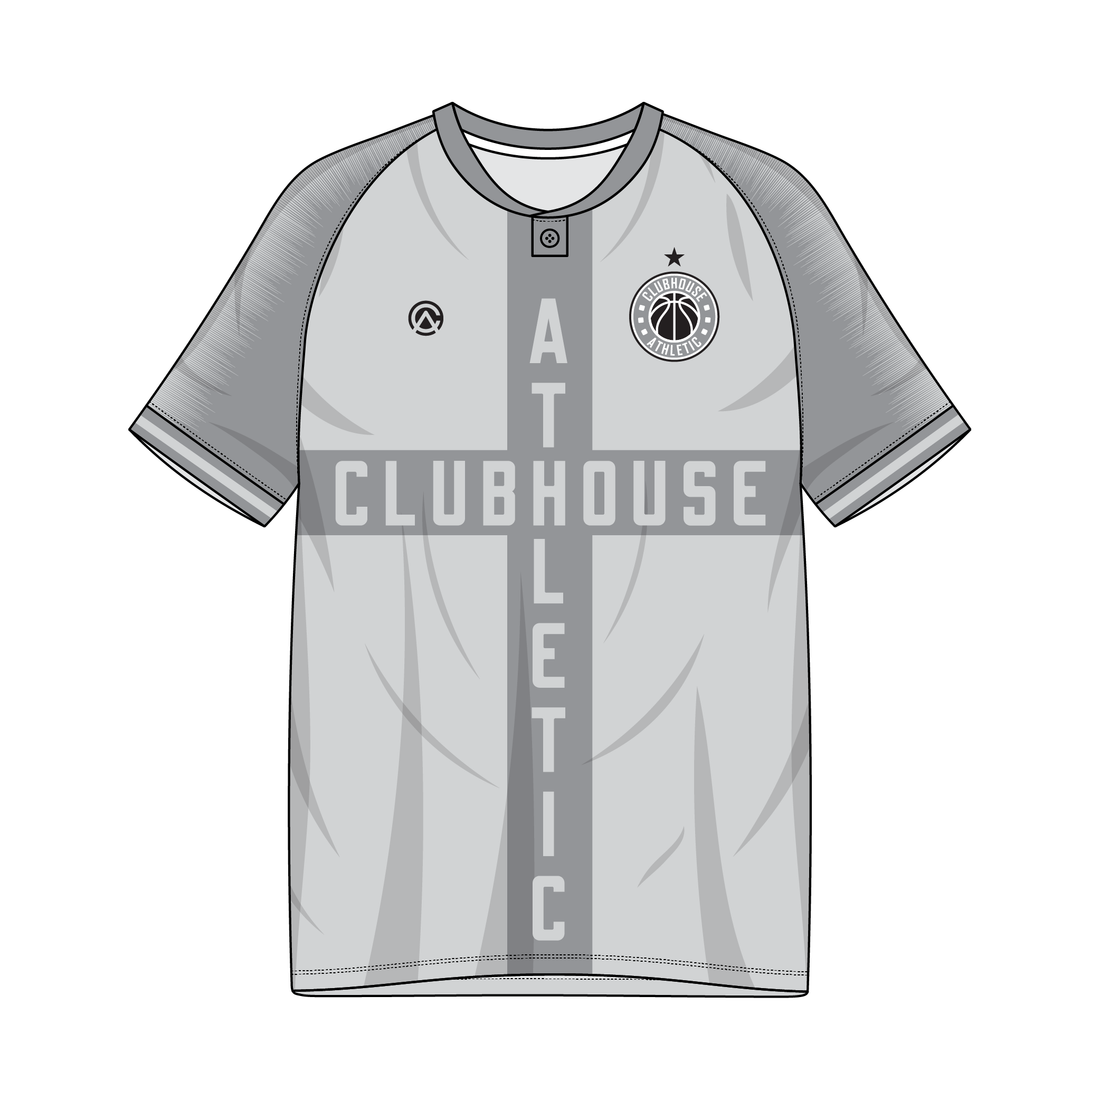 Clubhouse Original: Crossed One-Button Soccer Jersey